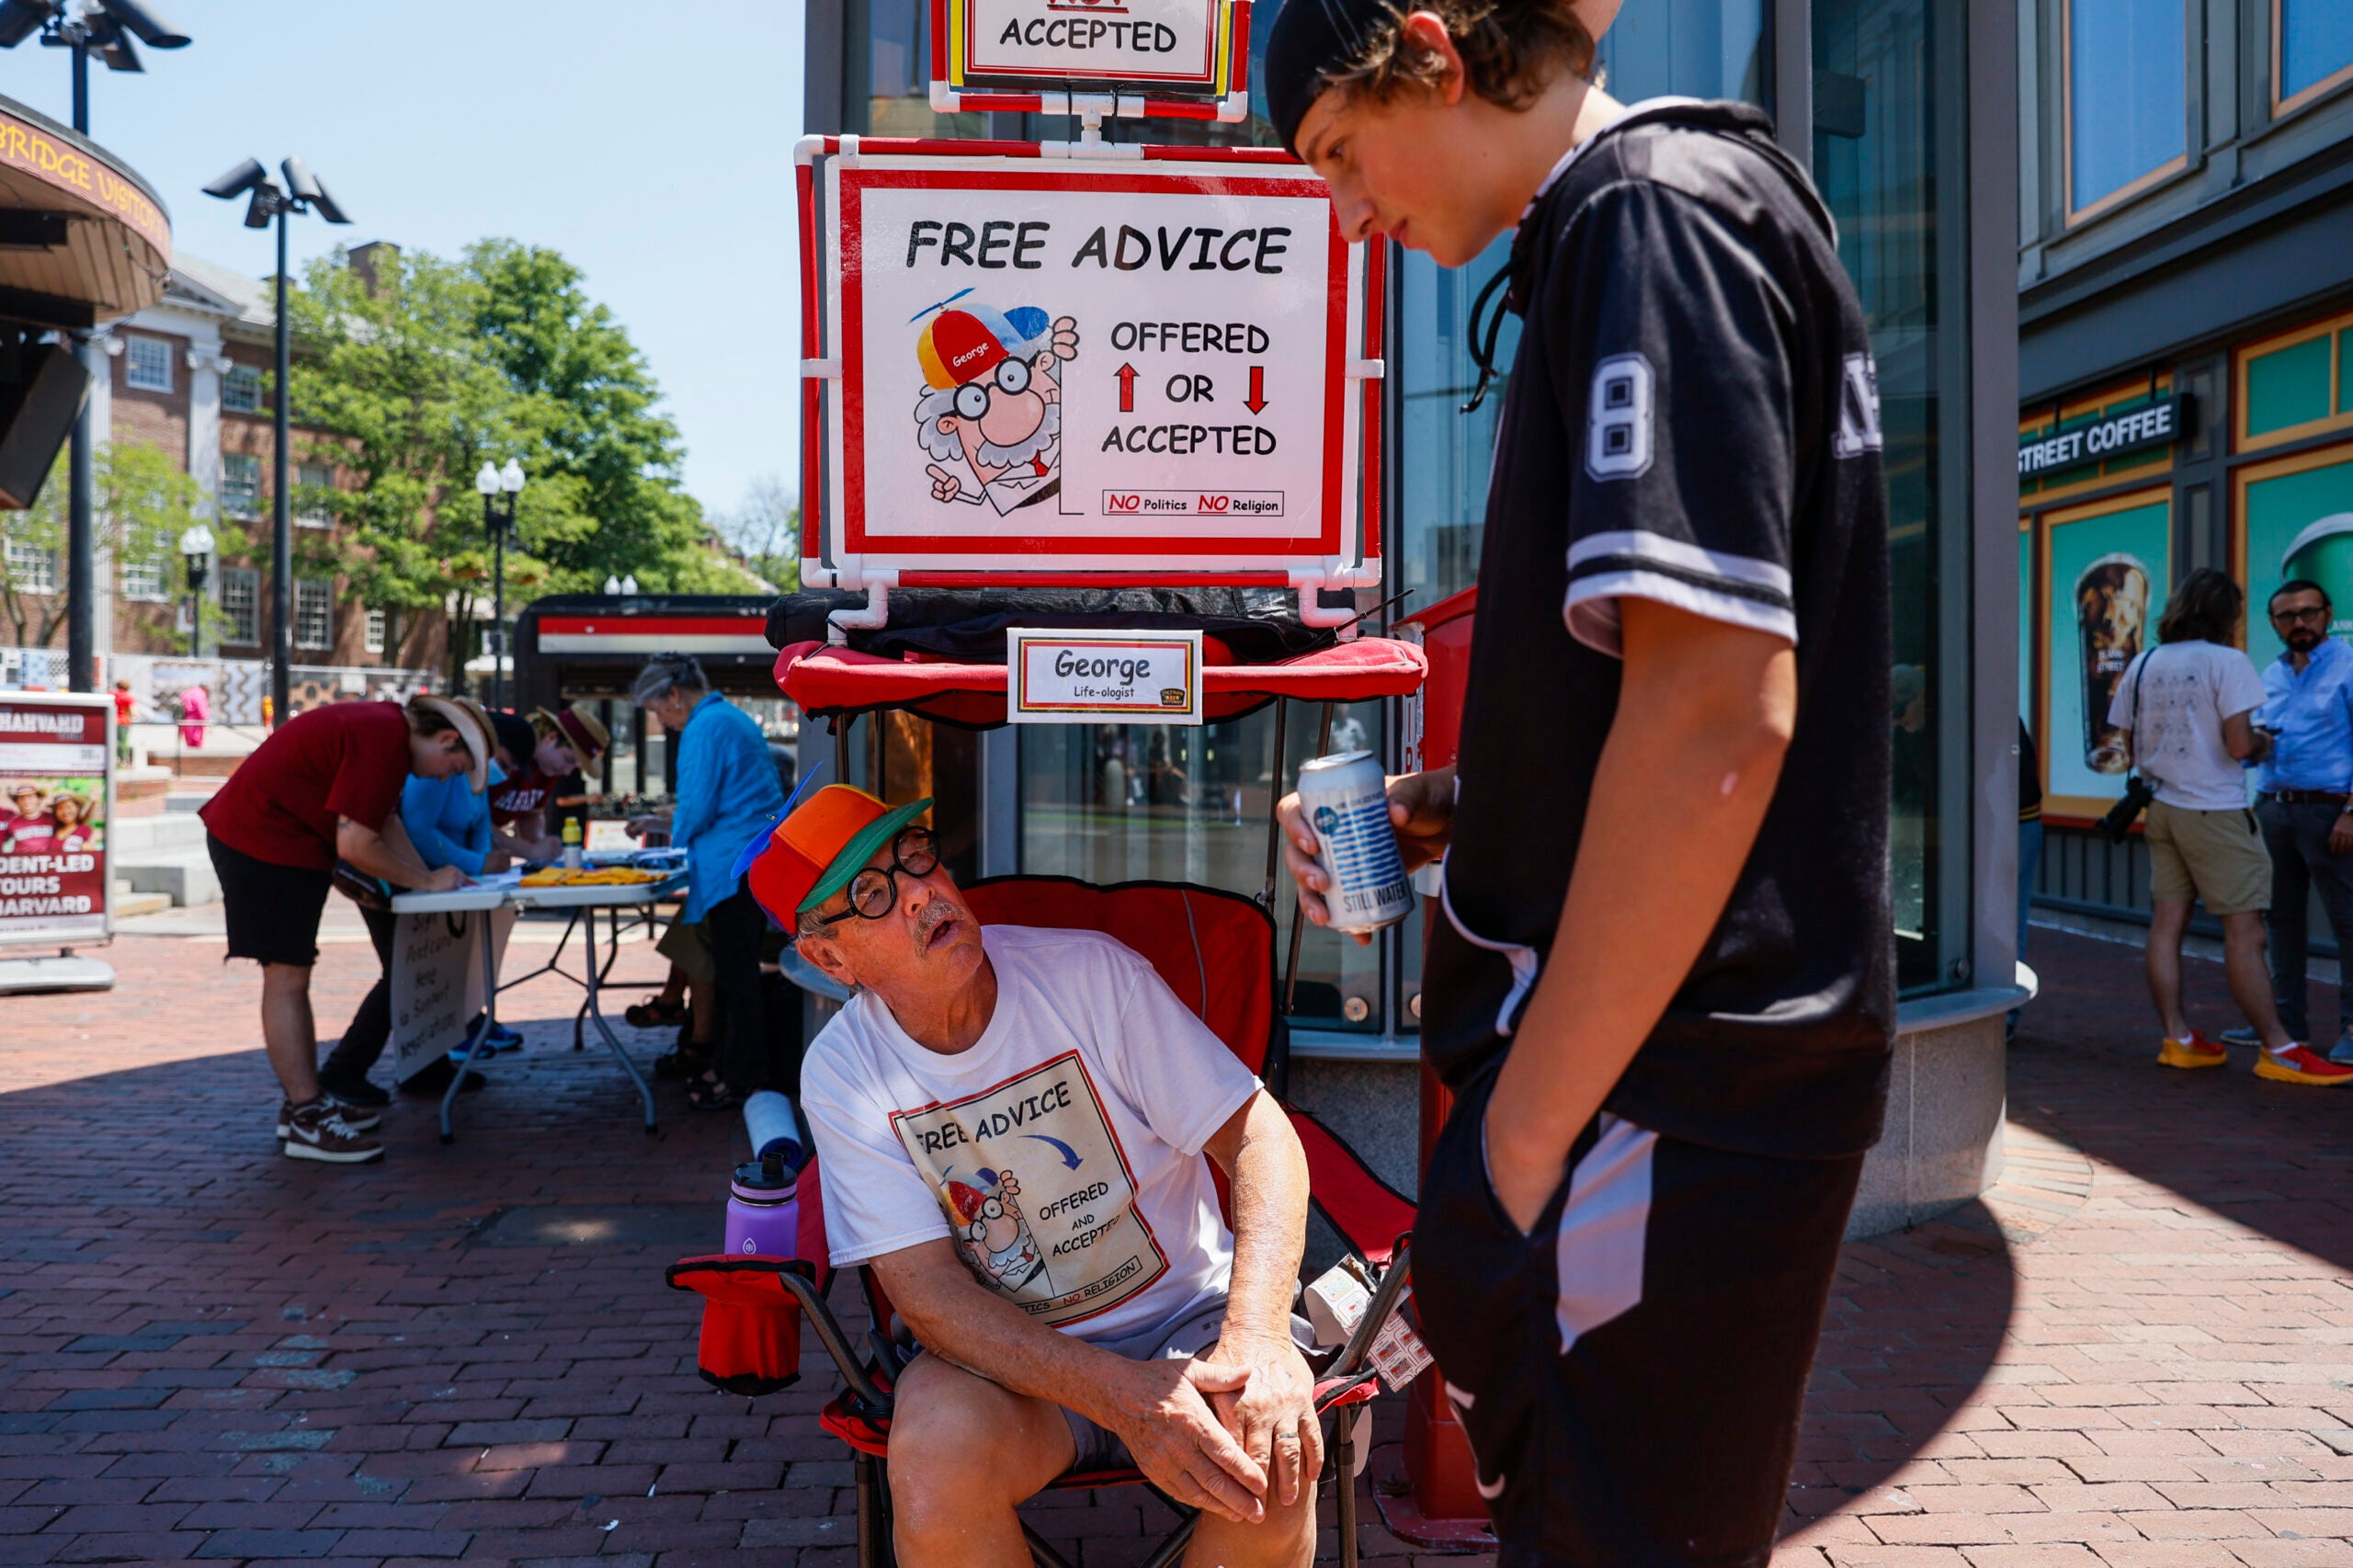 George Vaill, self-defined Life-oligist, offers advice to 15-year-old Stefan Alexandrov while sitting in Harvard Square on June 1, 2023. Known to passersby as the "free advice" guy, Vaill doles out counsel to strangers in Harvard Square from a folding chair.